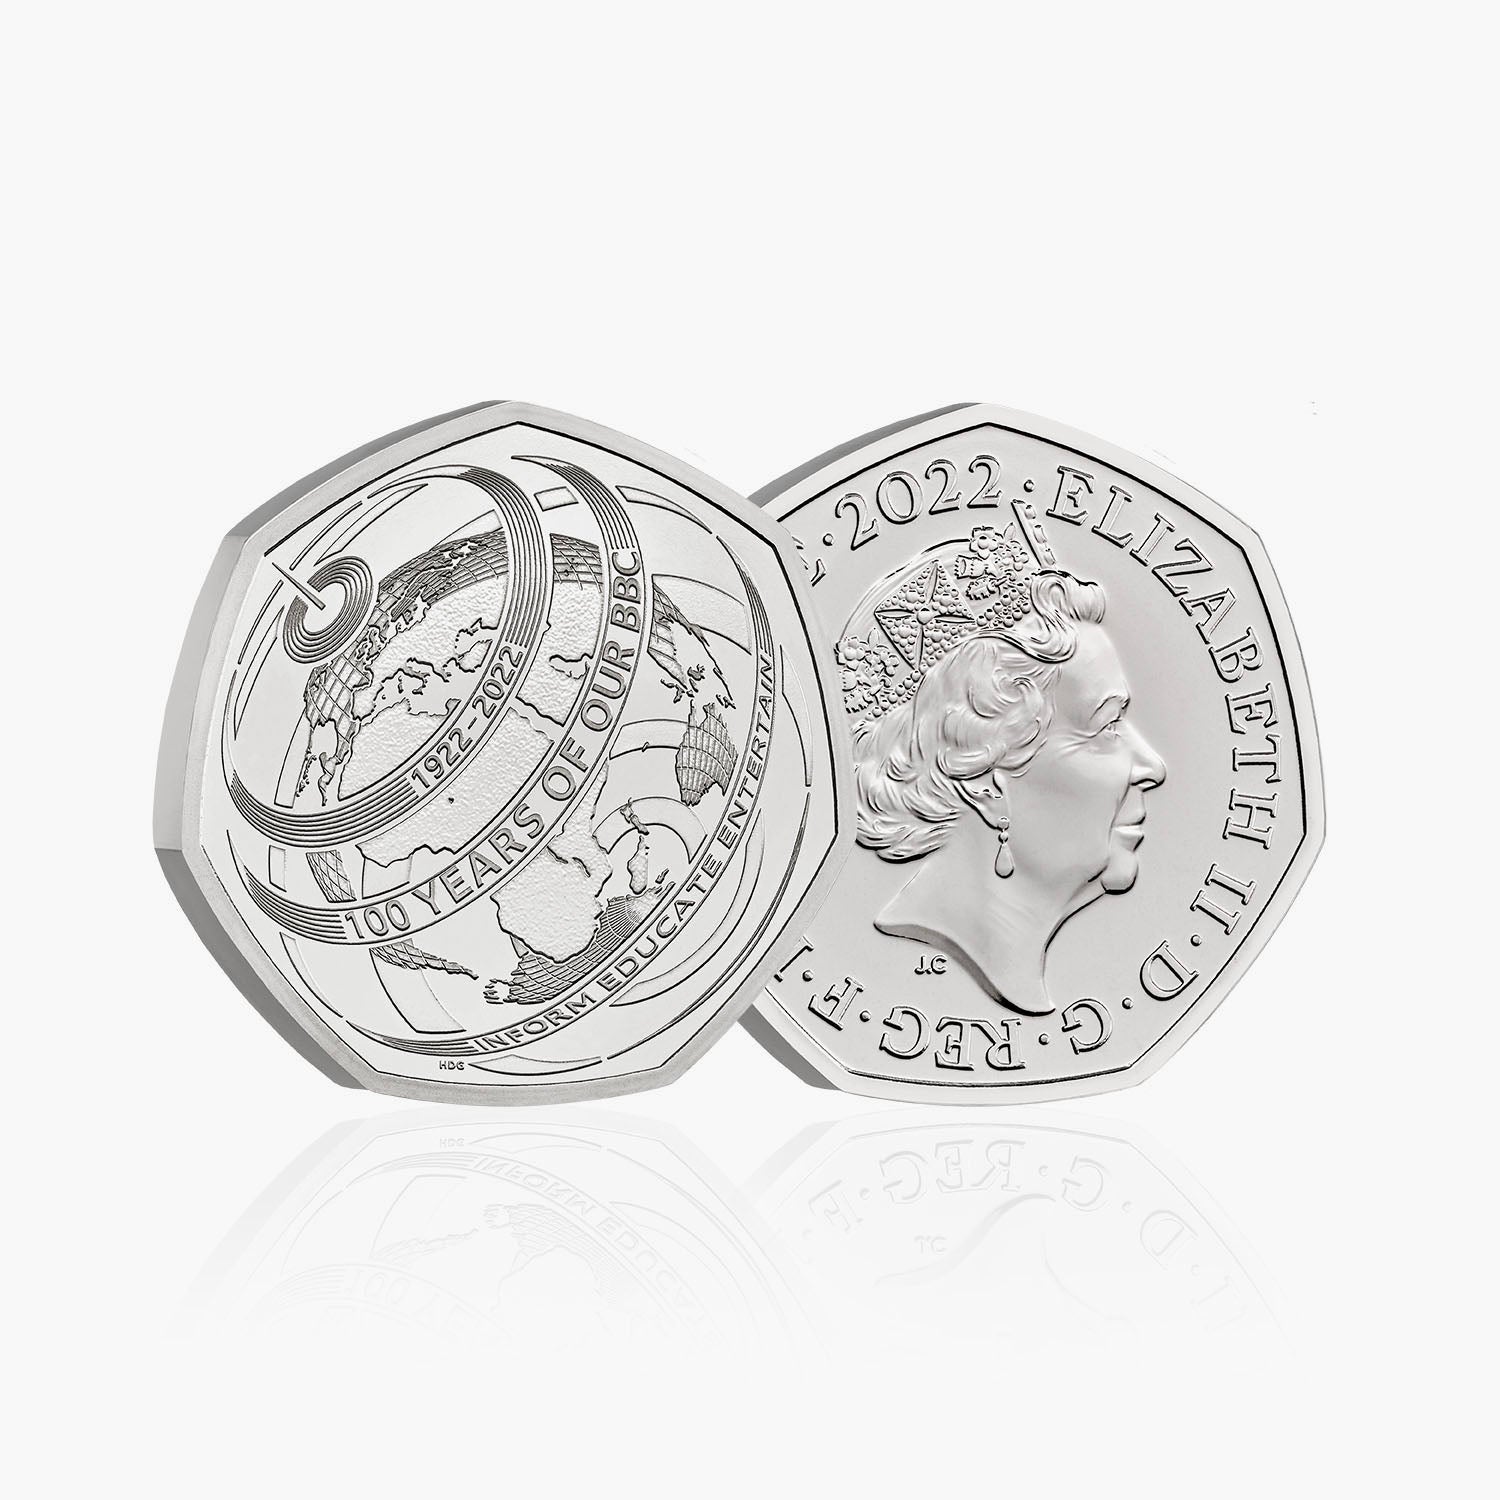 The 100th Anniversary of Our BBC 2022 UK 50p BU Coin